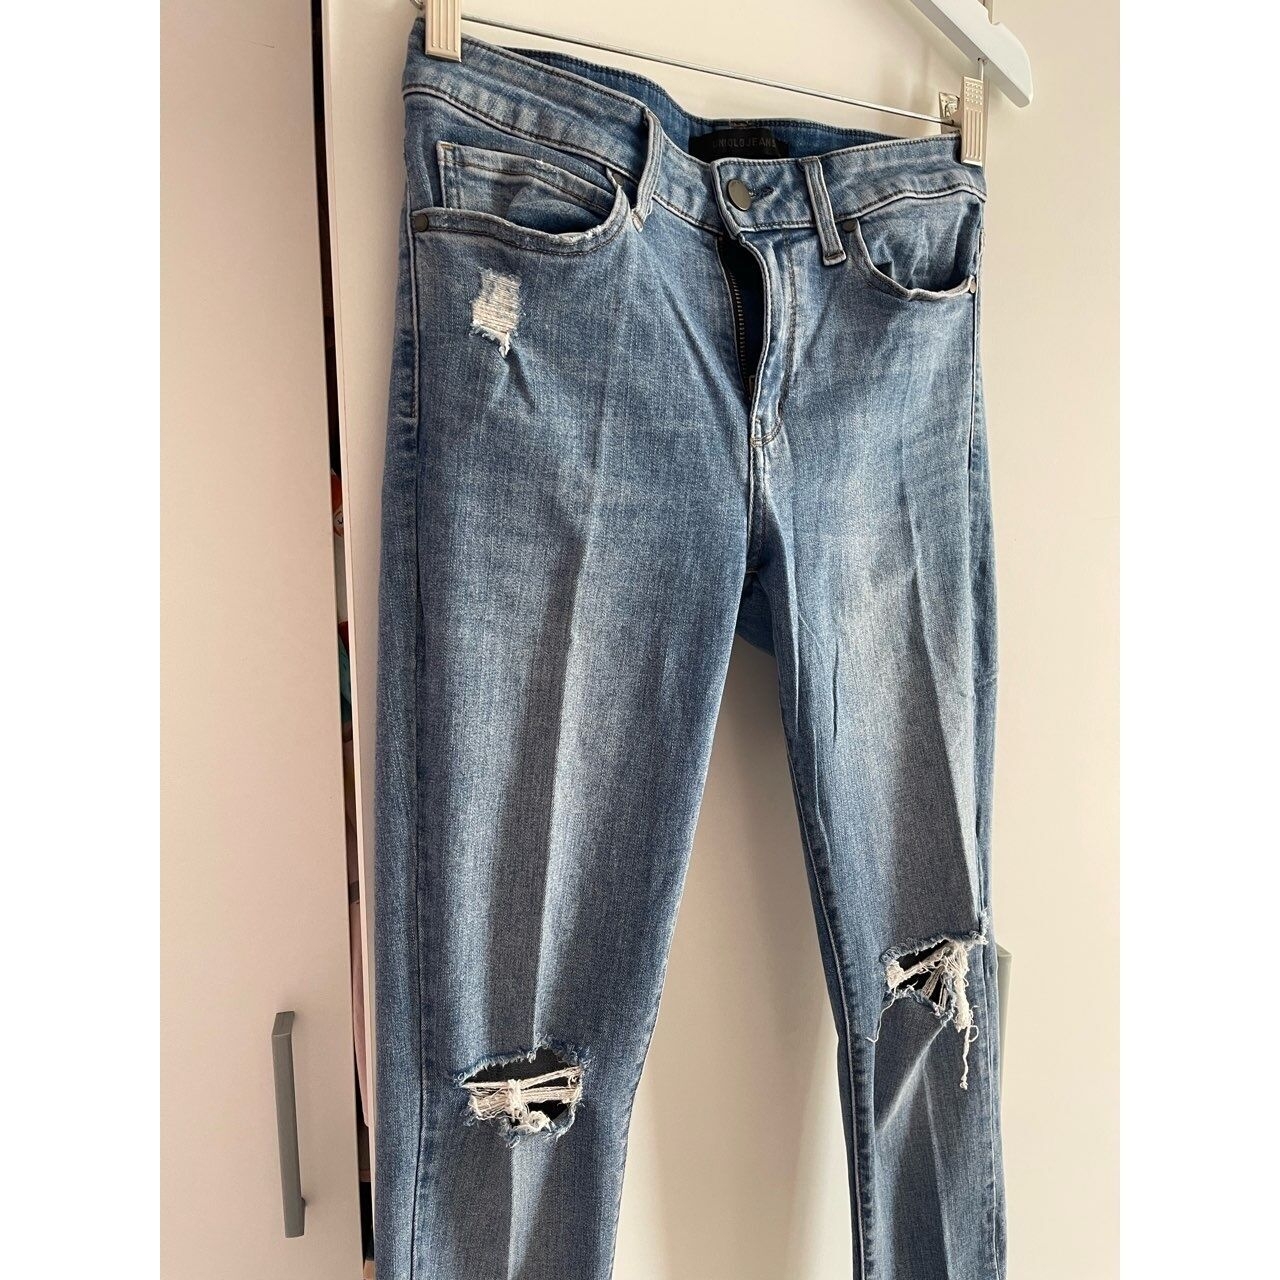 UNIQLO Blue Ripped Jeans Long Pants